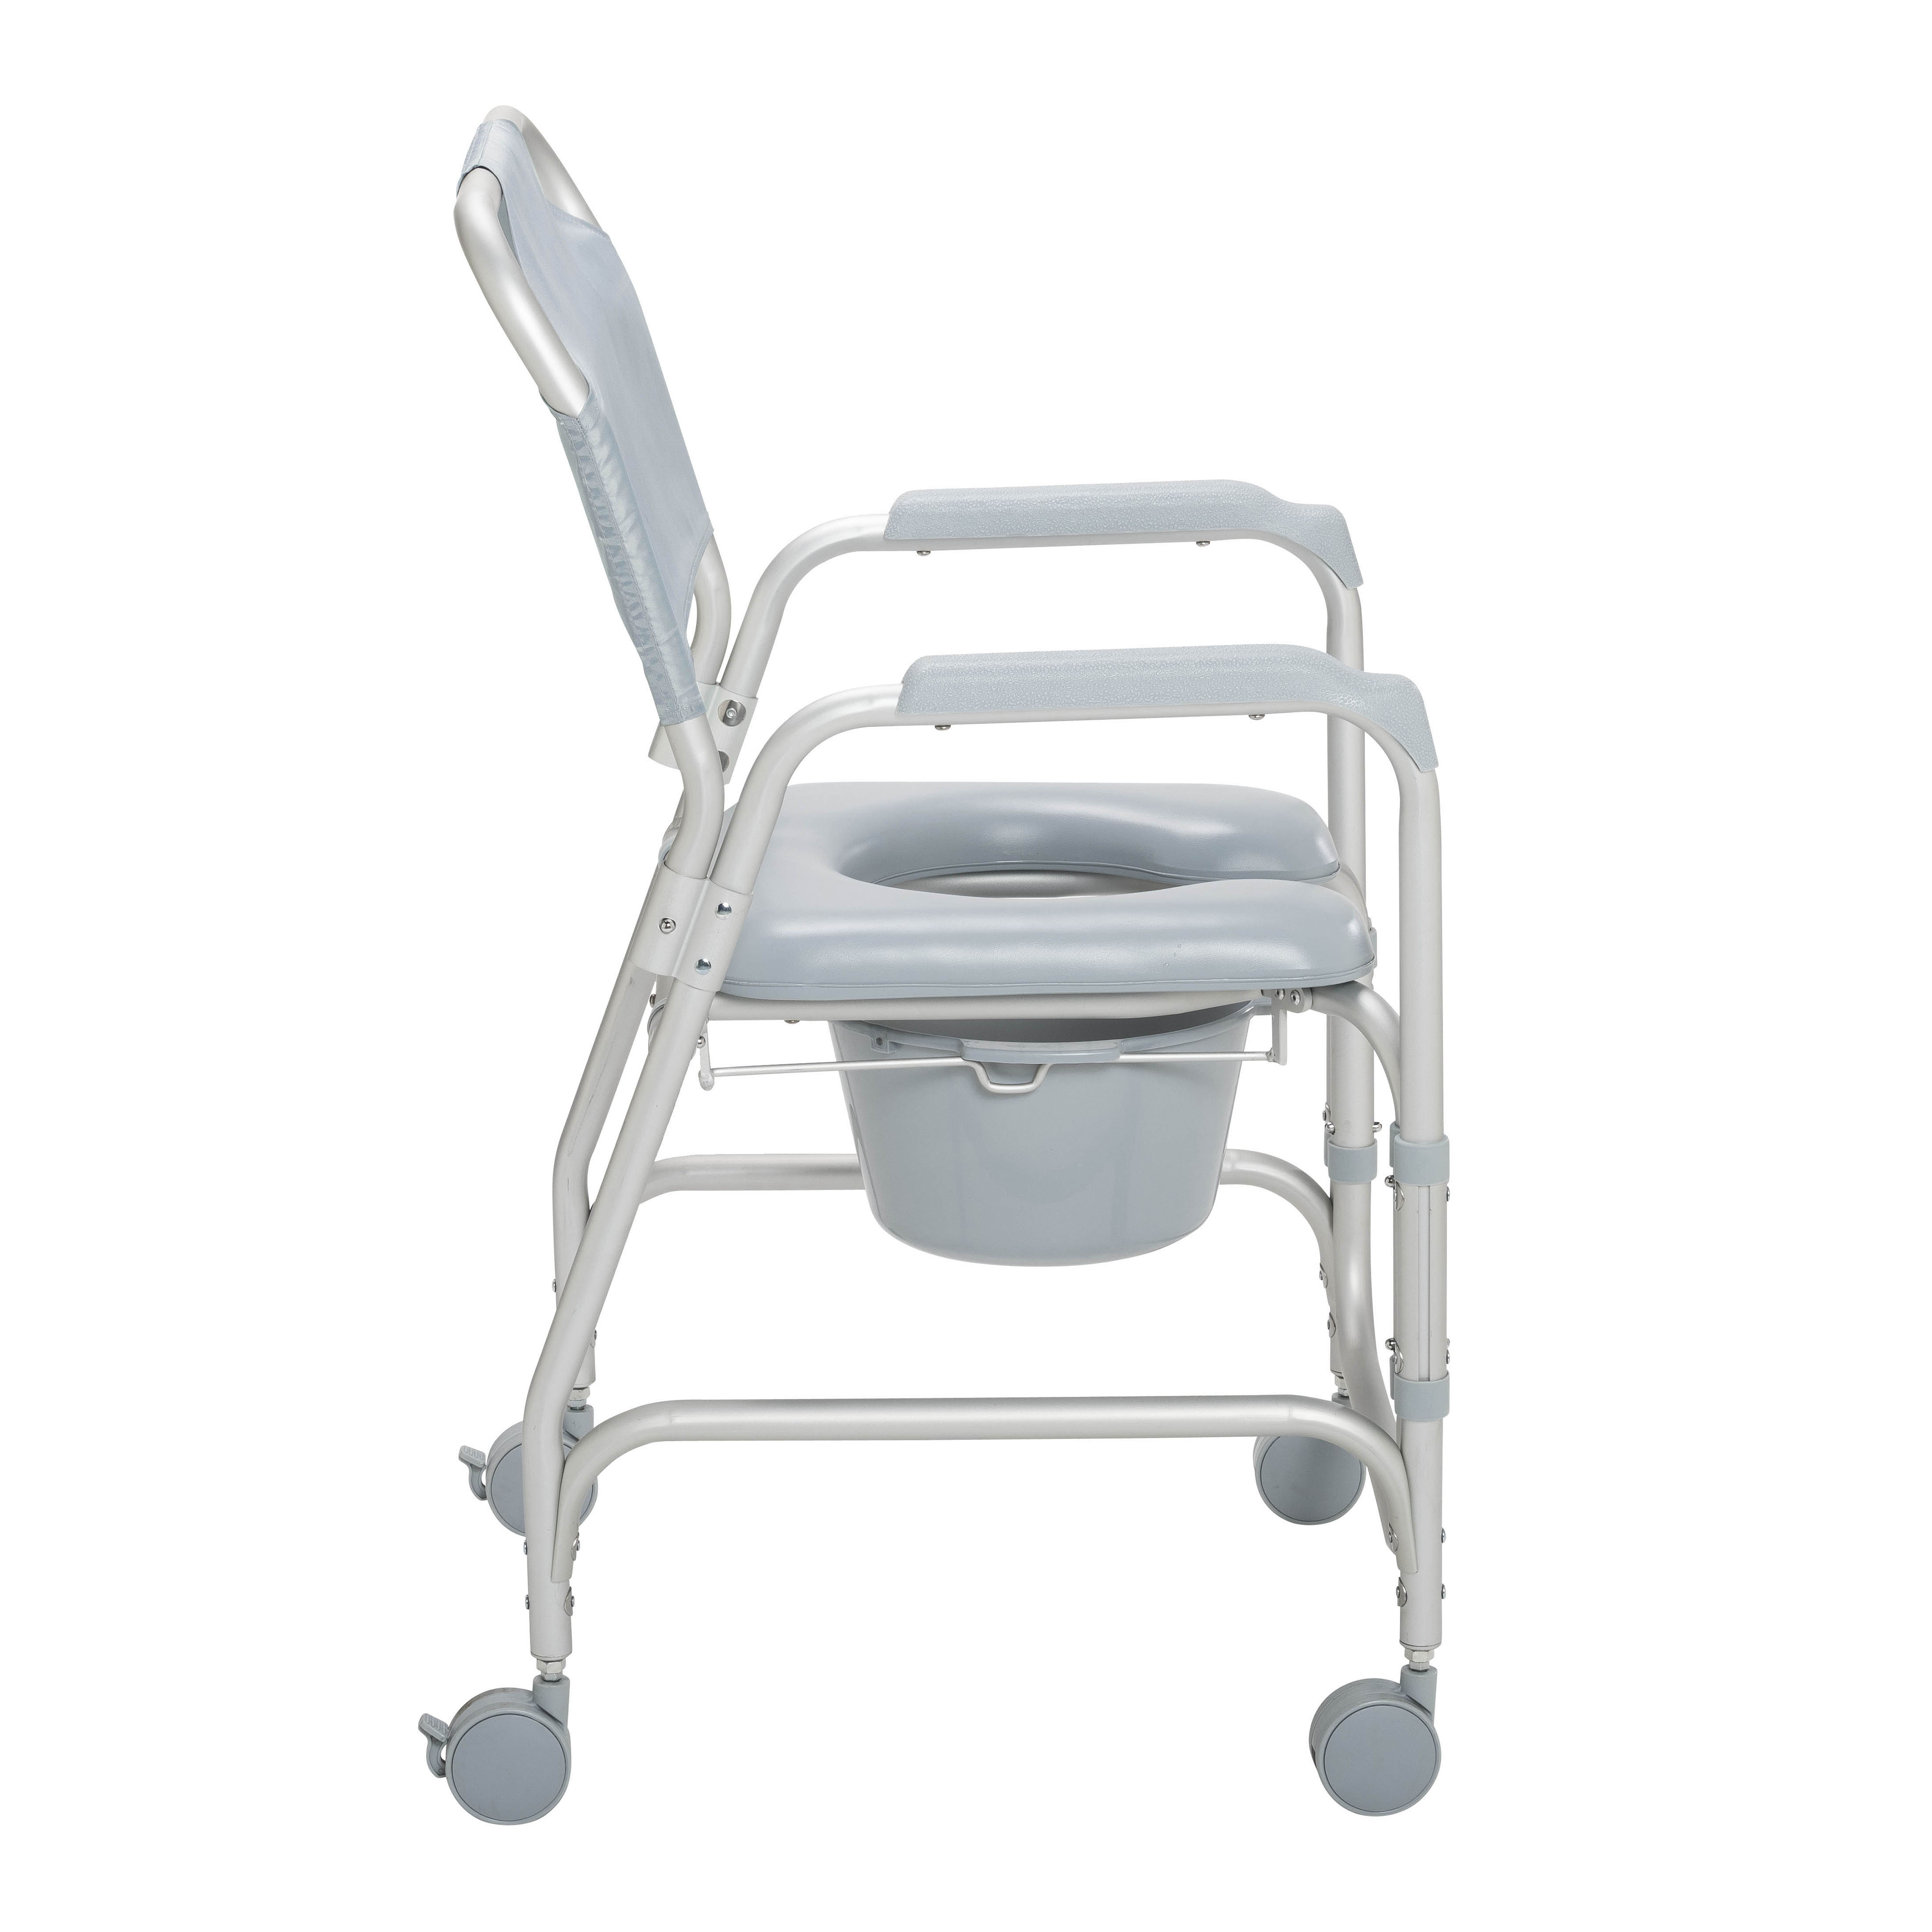 Buy Drive Medical Lightweight Portable Shower Commode Chair With Casters Online In Taiwan 21027821